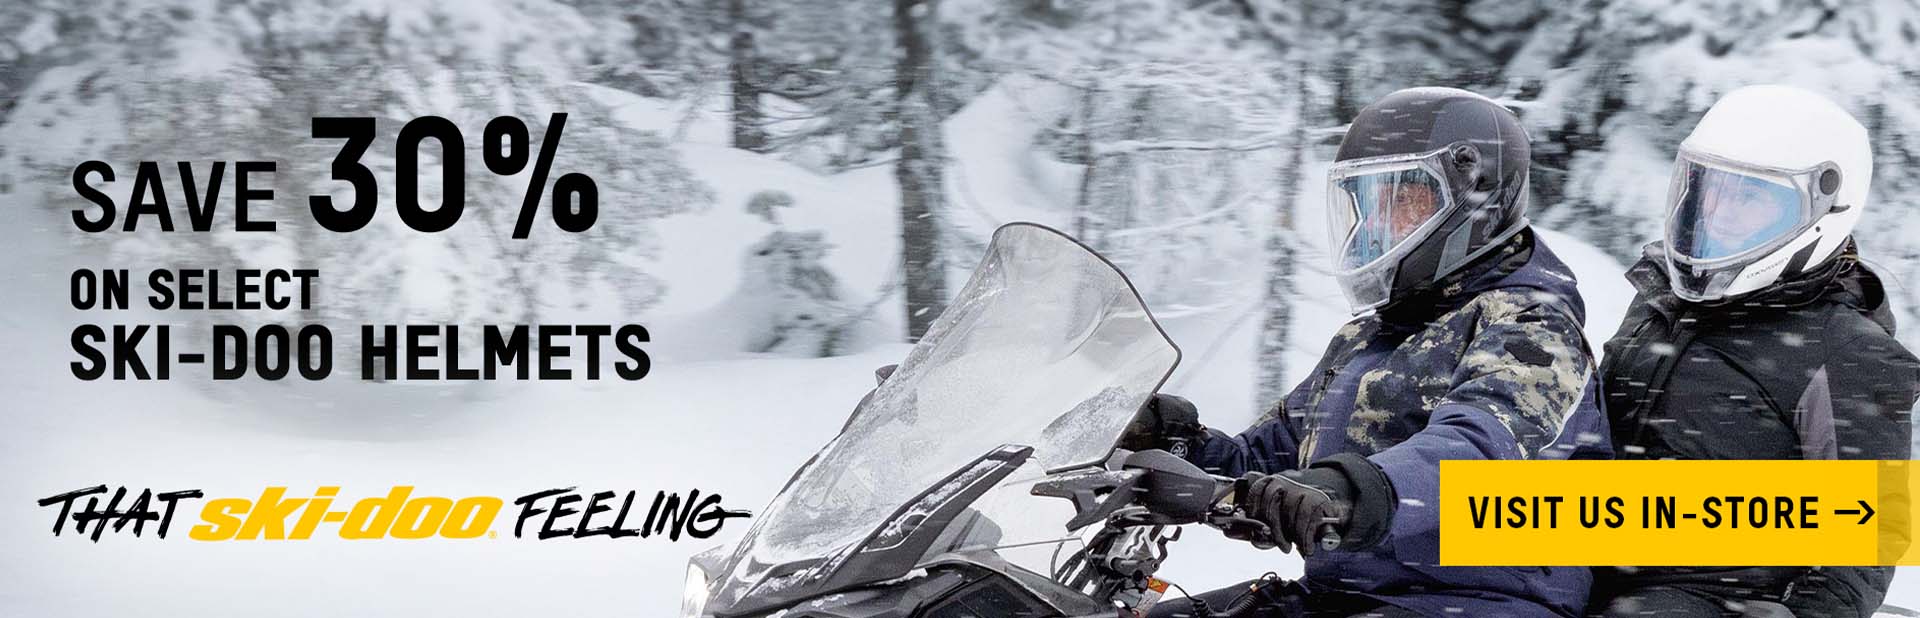 Get 30% off select Ski-Doo and/or Lynx Helmet purchase